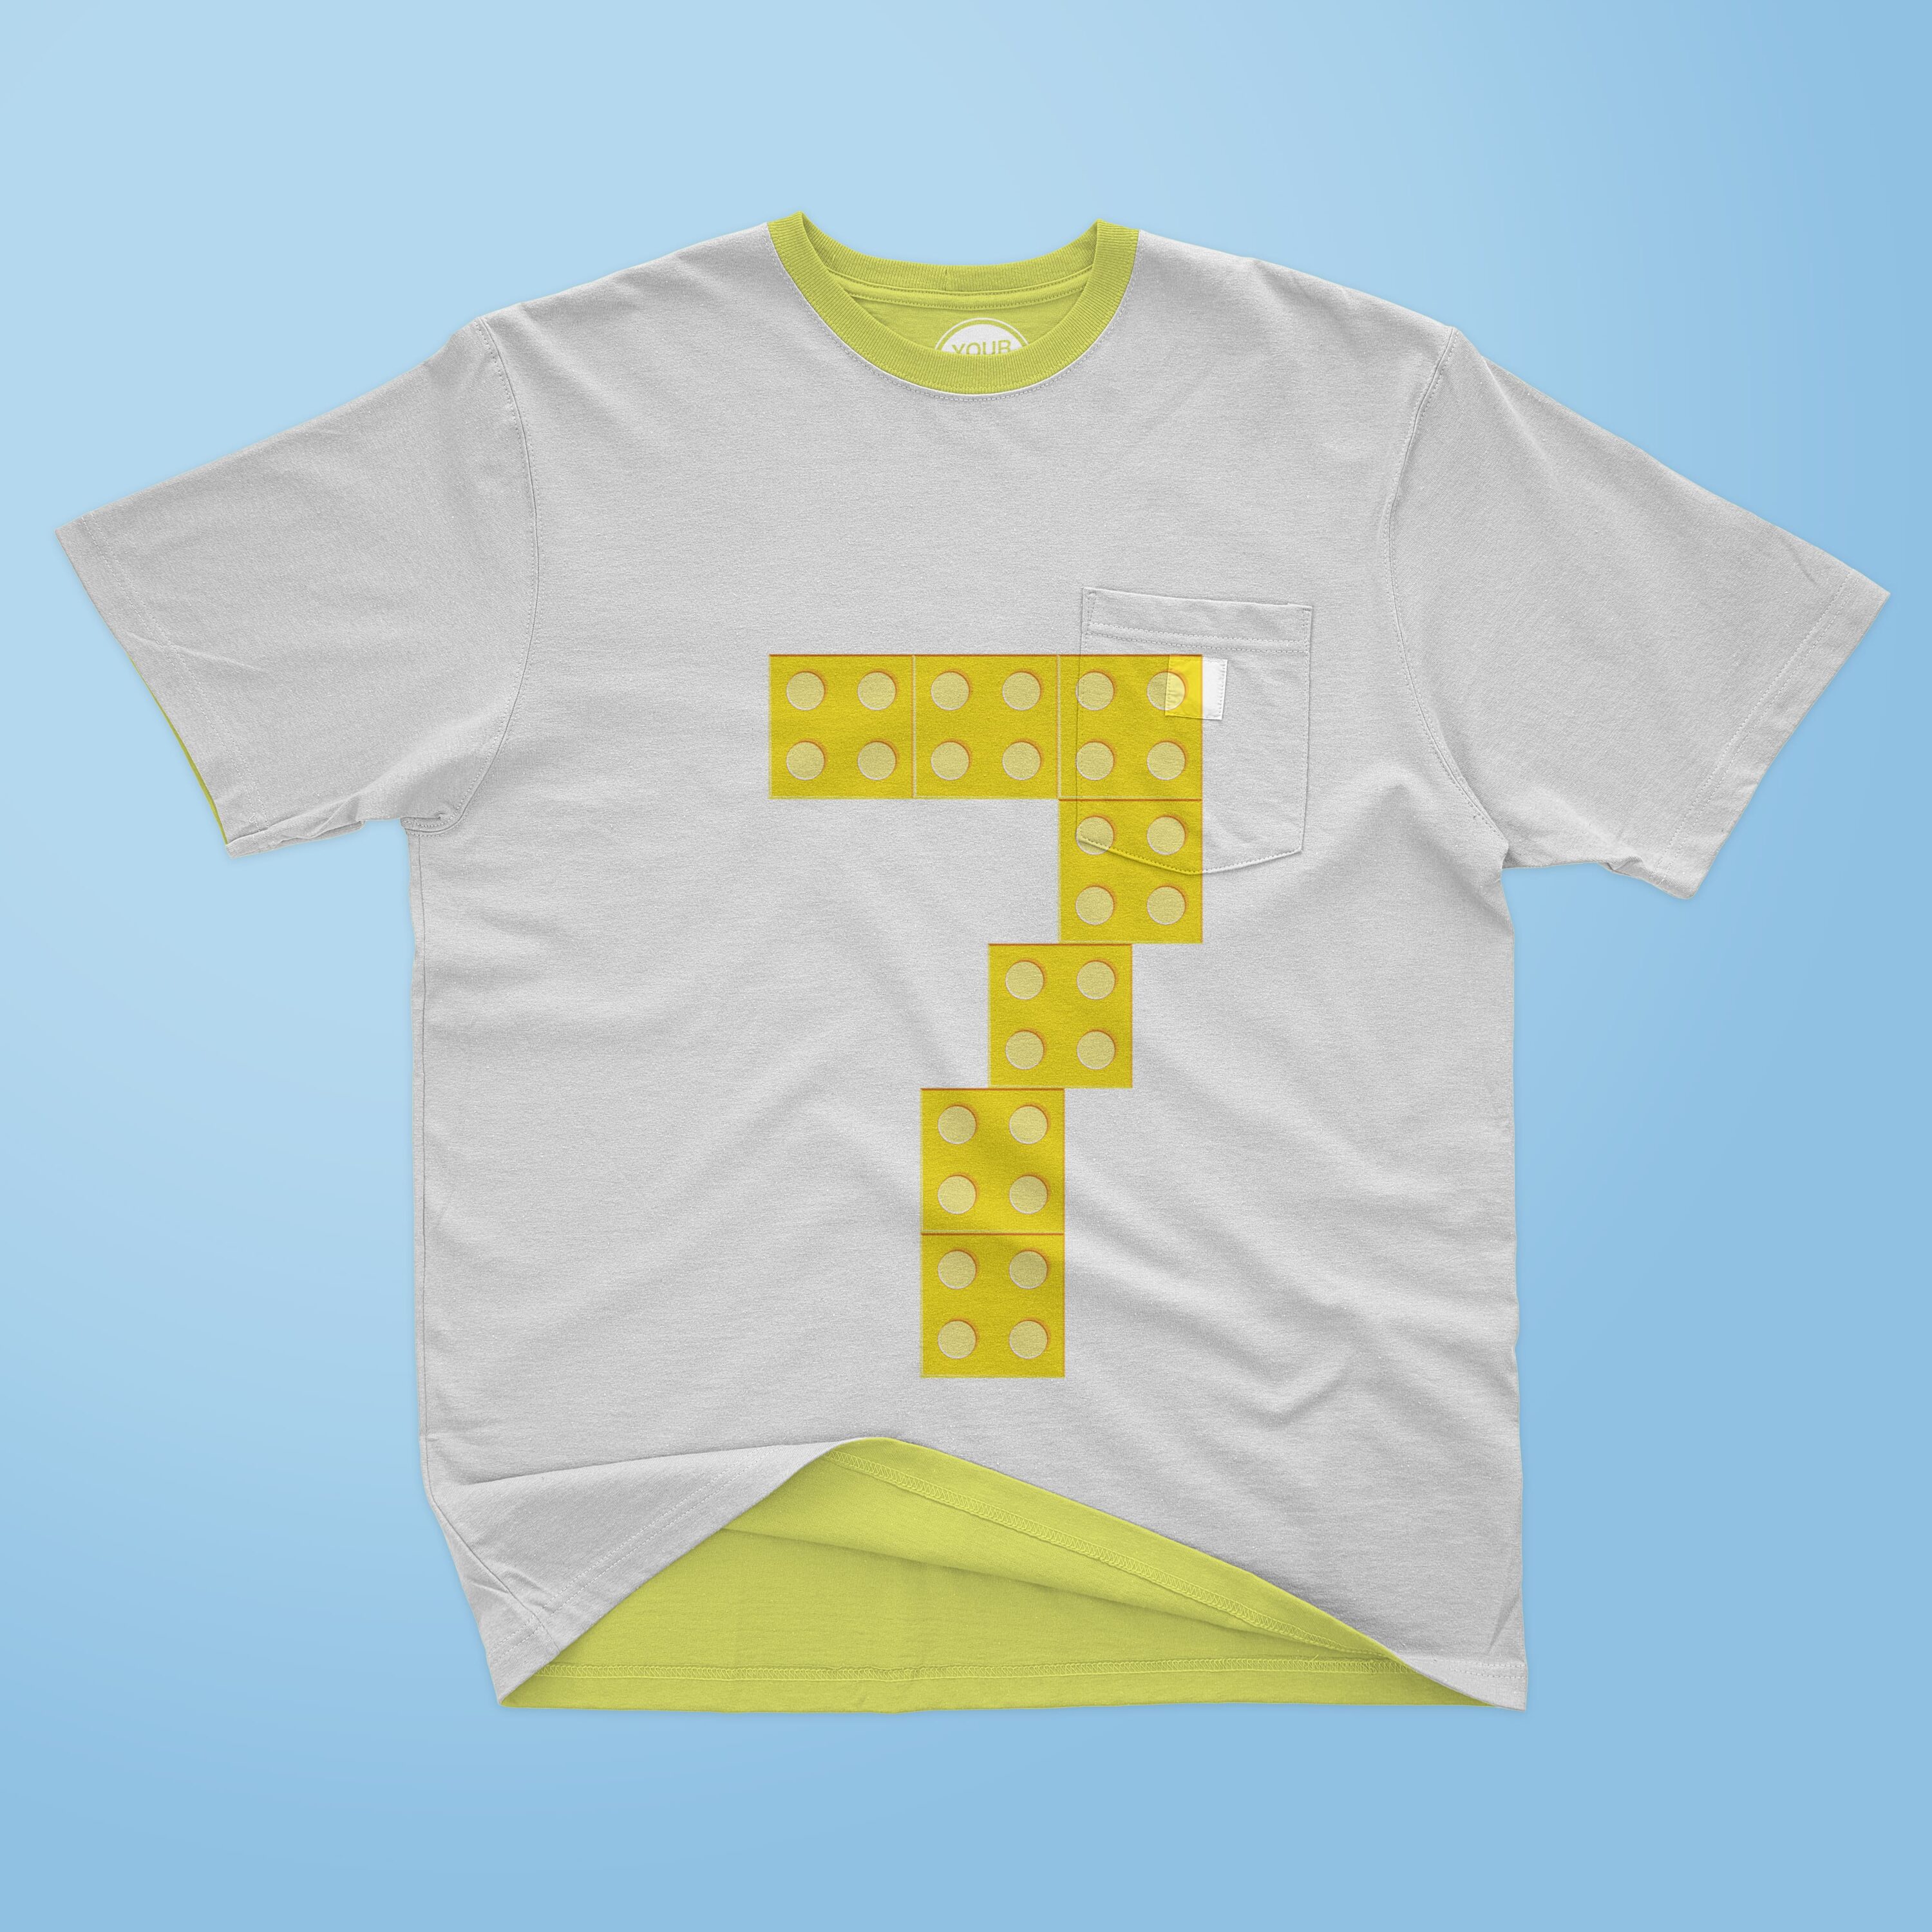 Number 7 made from yellow lego bricks - t-shirt design.